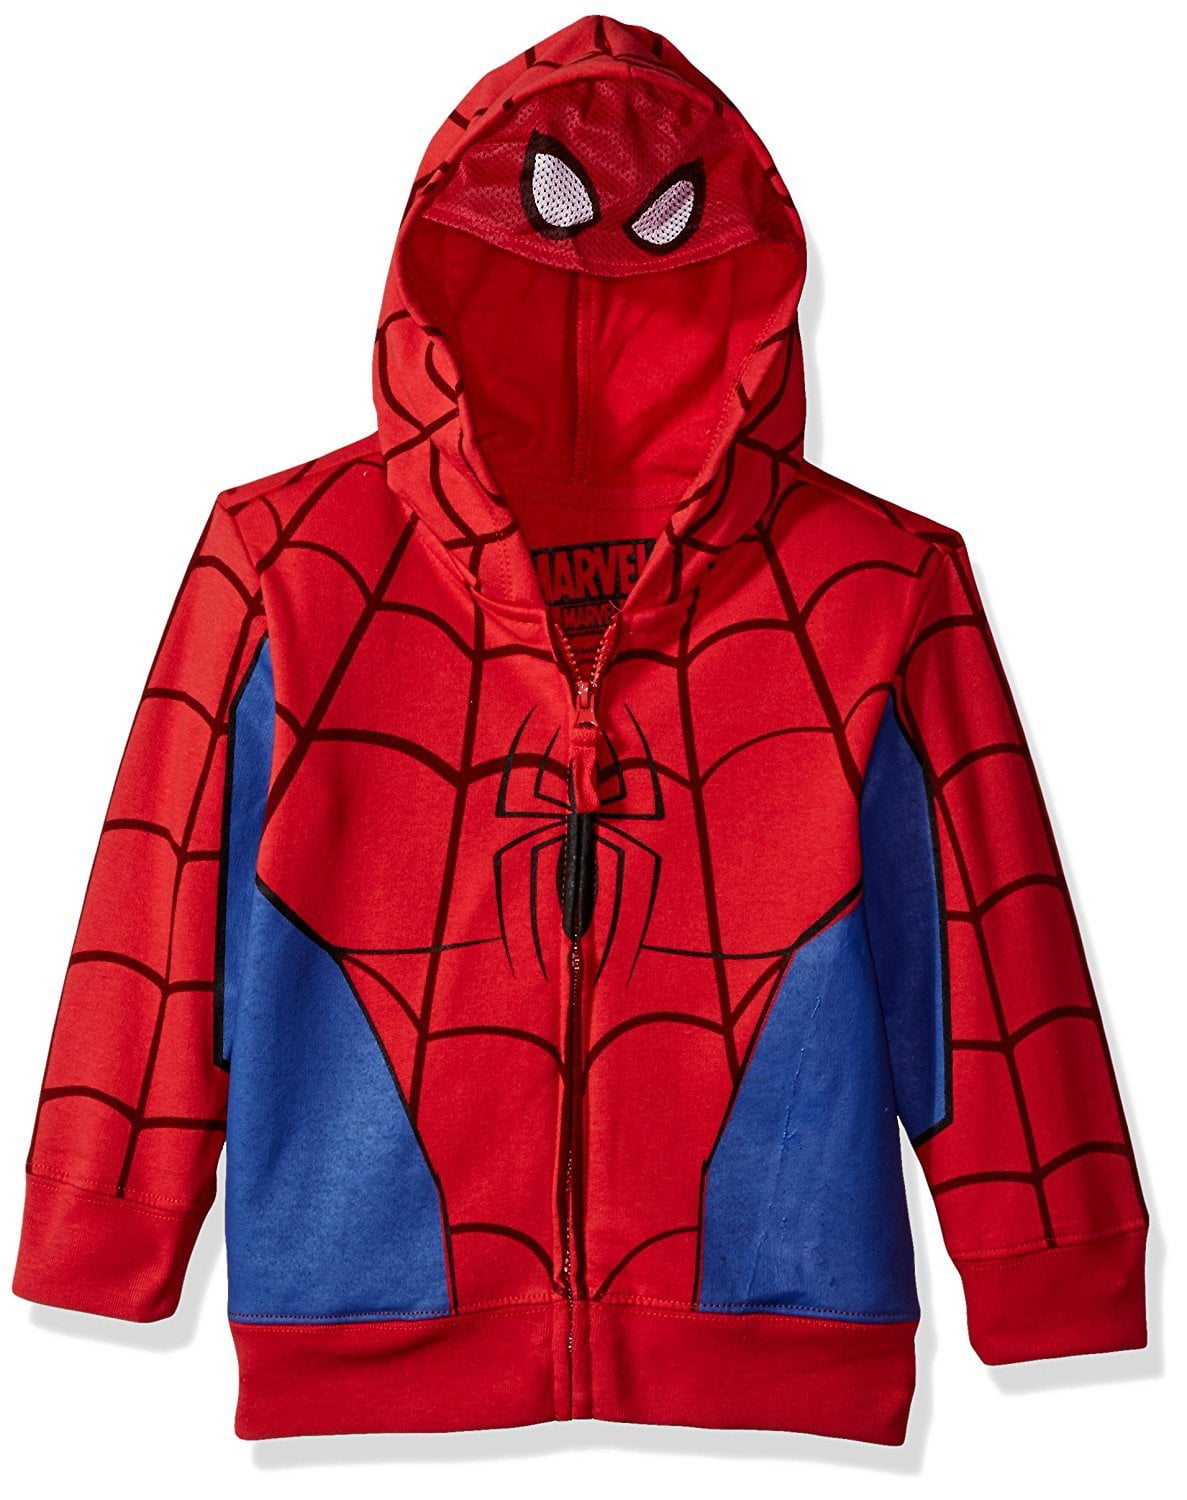 Kids Cosply Jacket Coat Creep Costume Hoodie Pants Outfit Set with Mesh Mask for Kids Boys